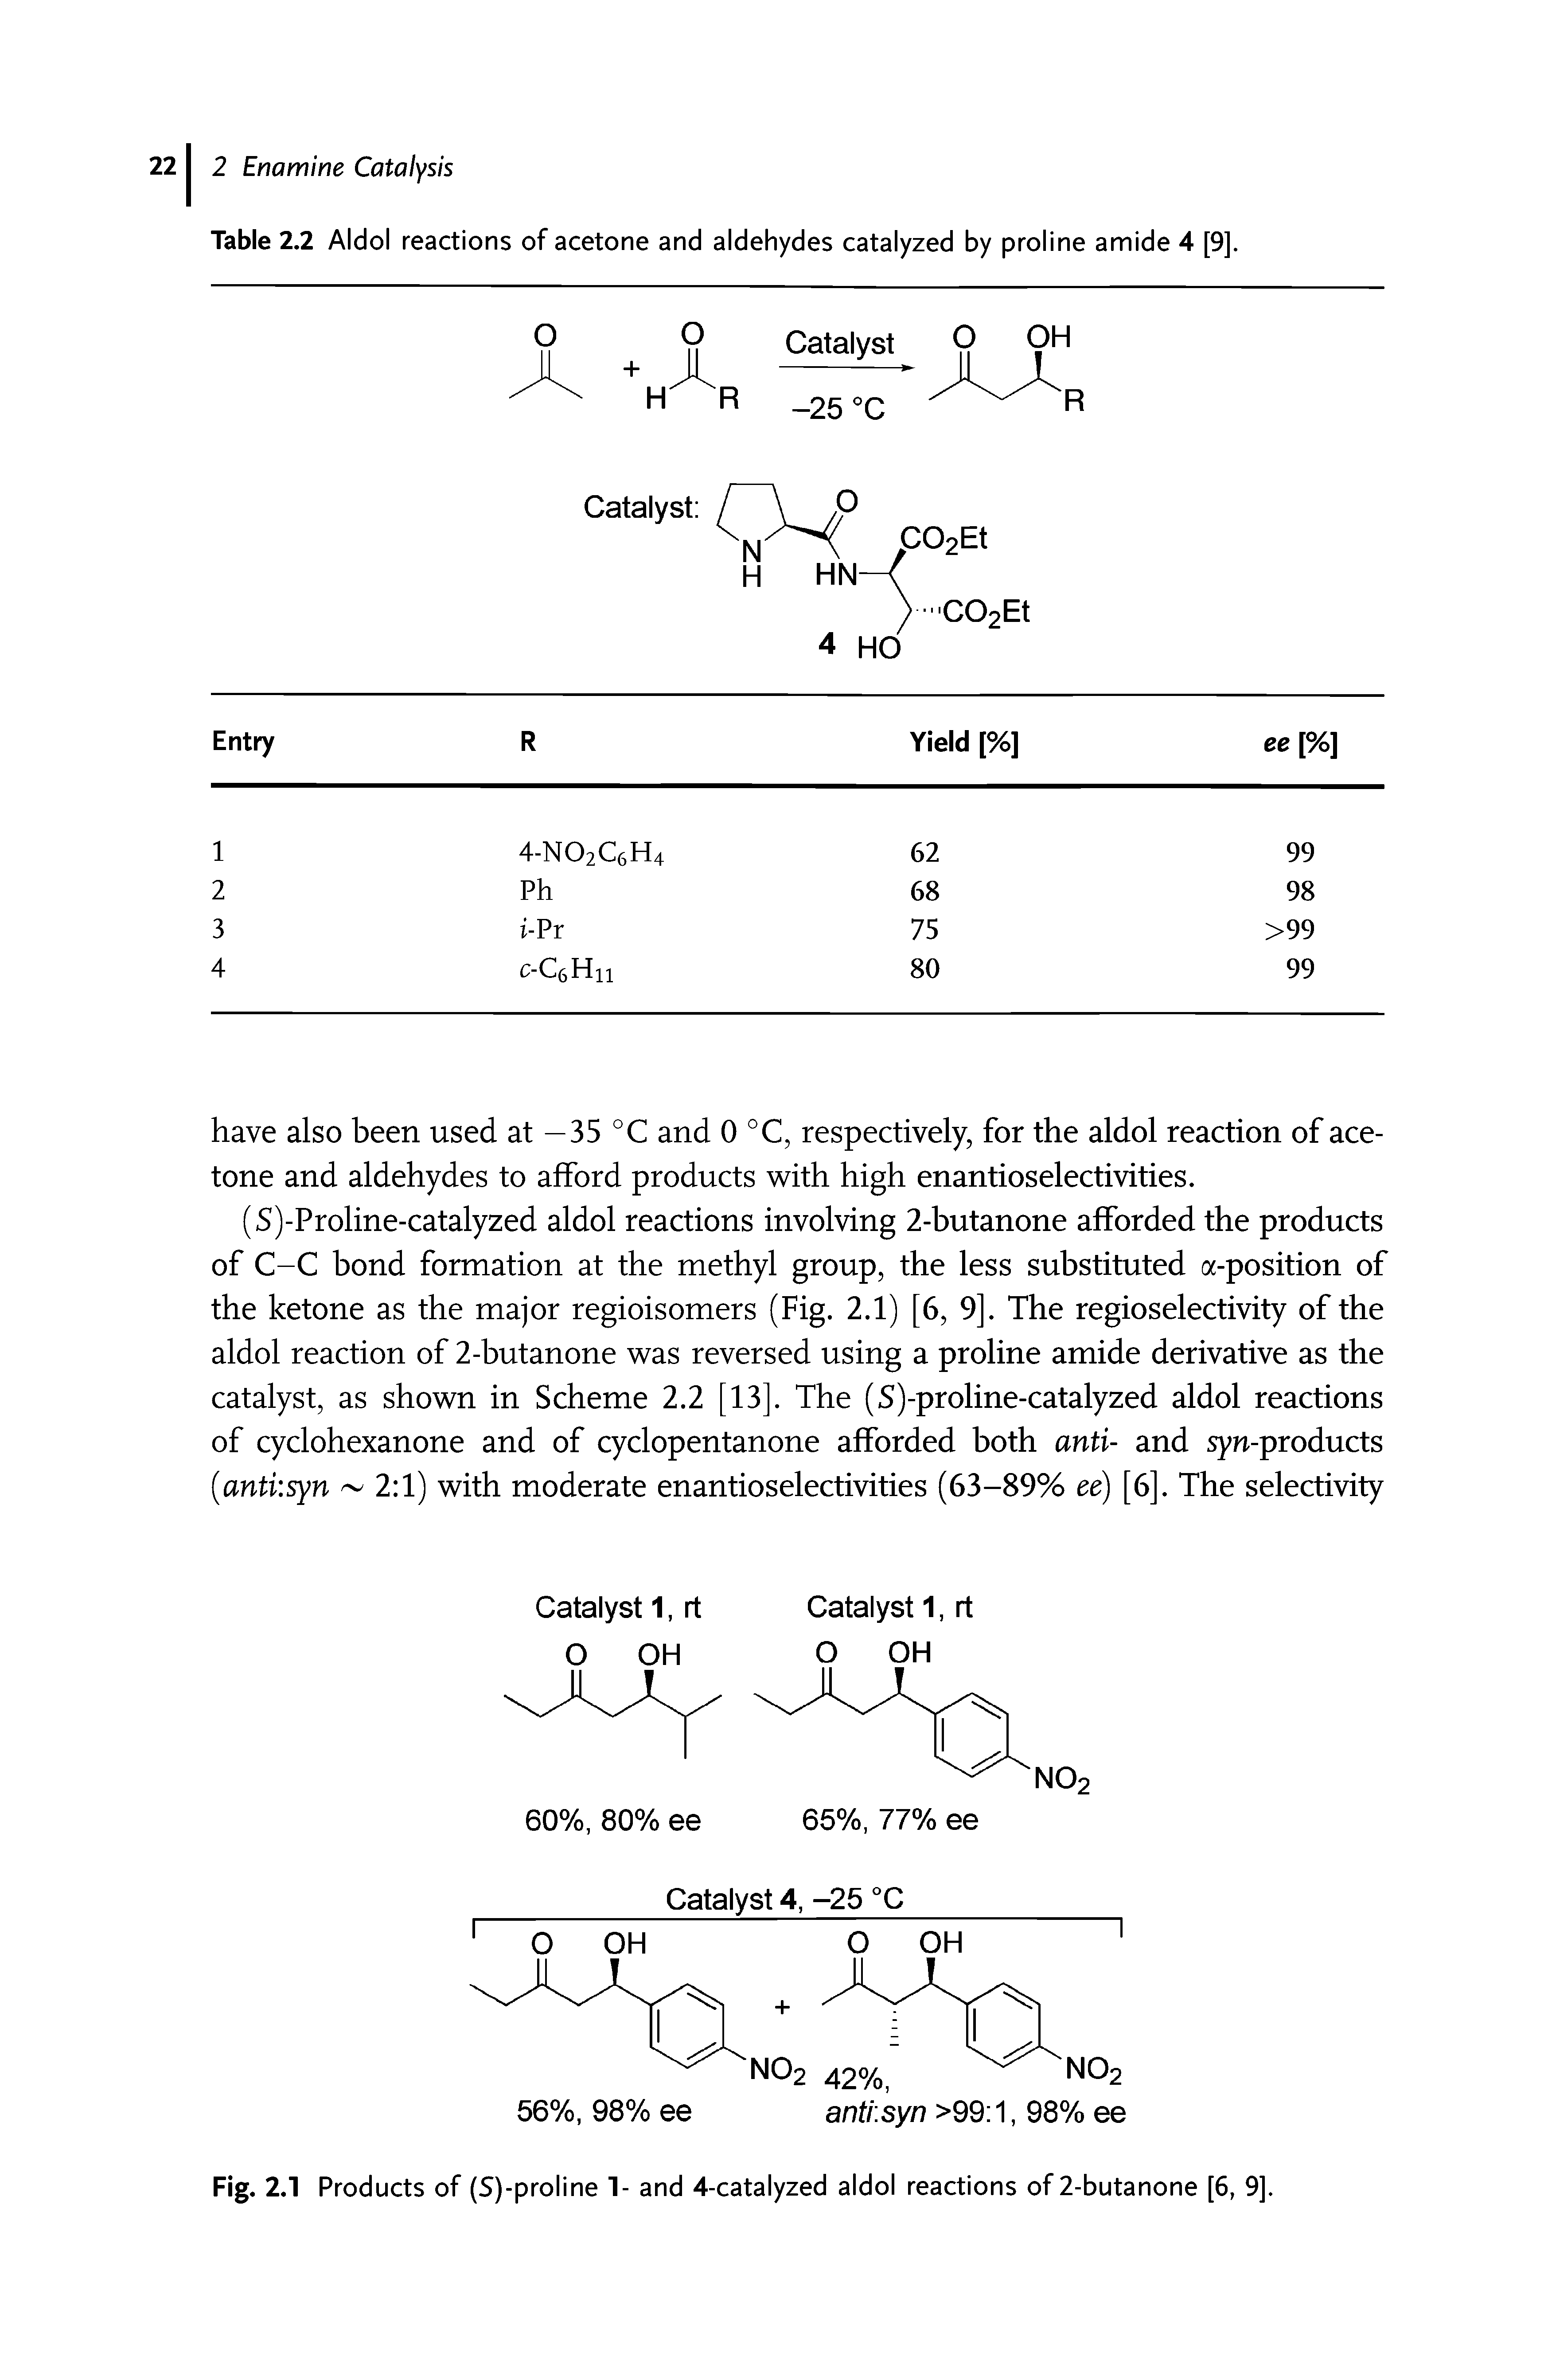 Table 2.2 Aldol reactions of acetone and aldehydes catalyzed by proline amide 4 [9].